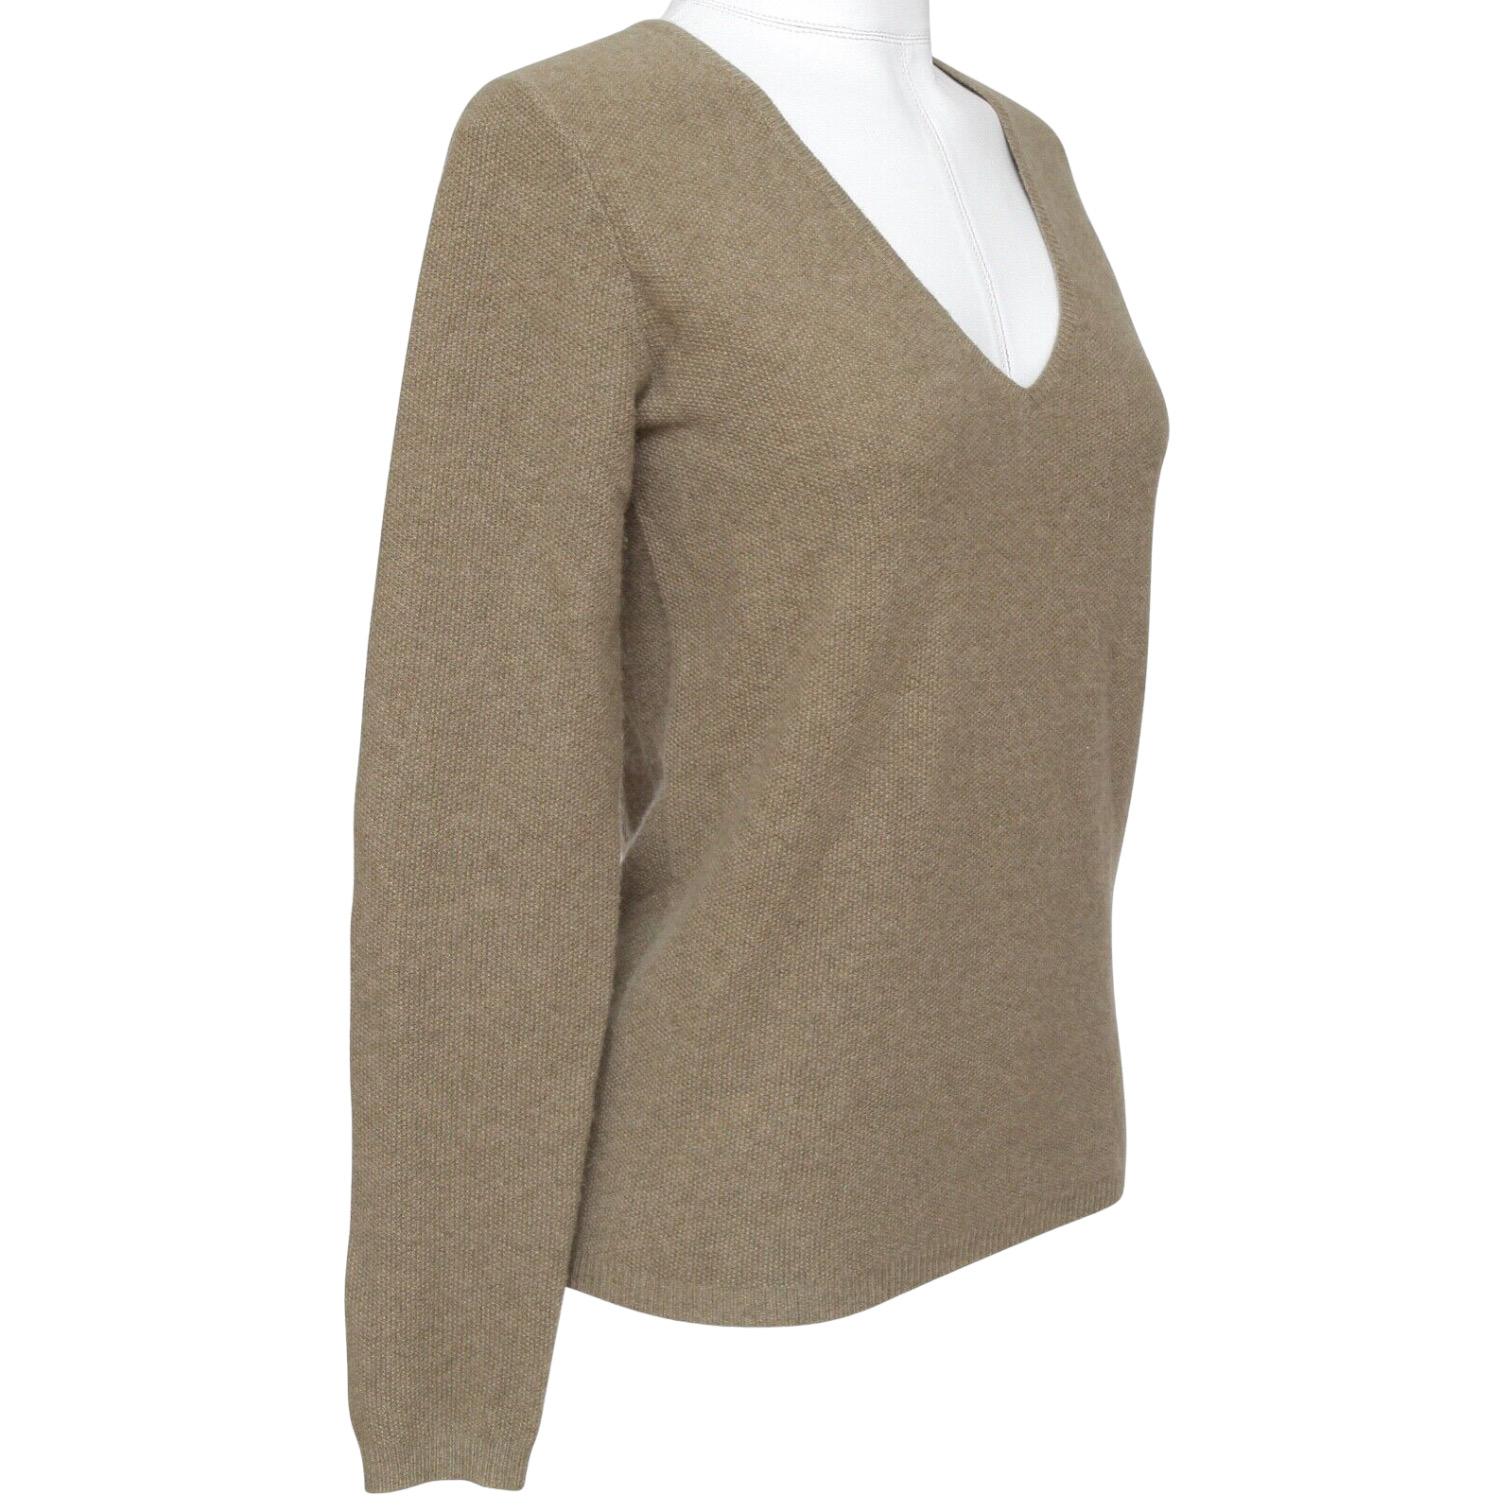 GUARANTEED AUTHENTIC CHLOE CASHMERE V-NECK SWEATER

 

Details:
- Lightweight pullover v-neck cashmere sweater in a mossy green color.
- Long sleeve.
- Ribbing at neckline, sleeves and hem.
- Easy great piece for your Chloe collection.

Size: